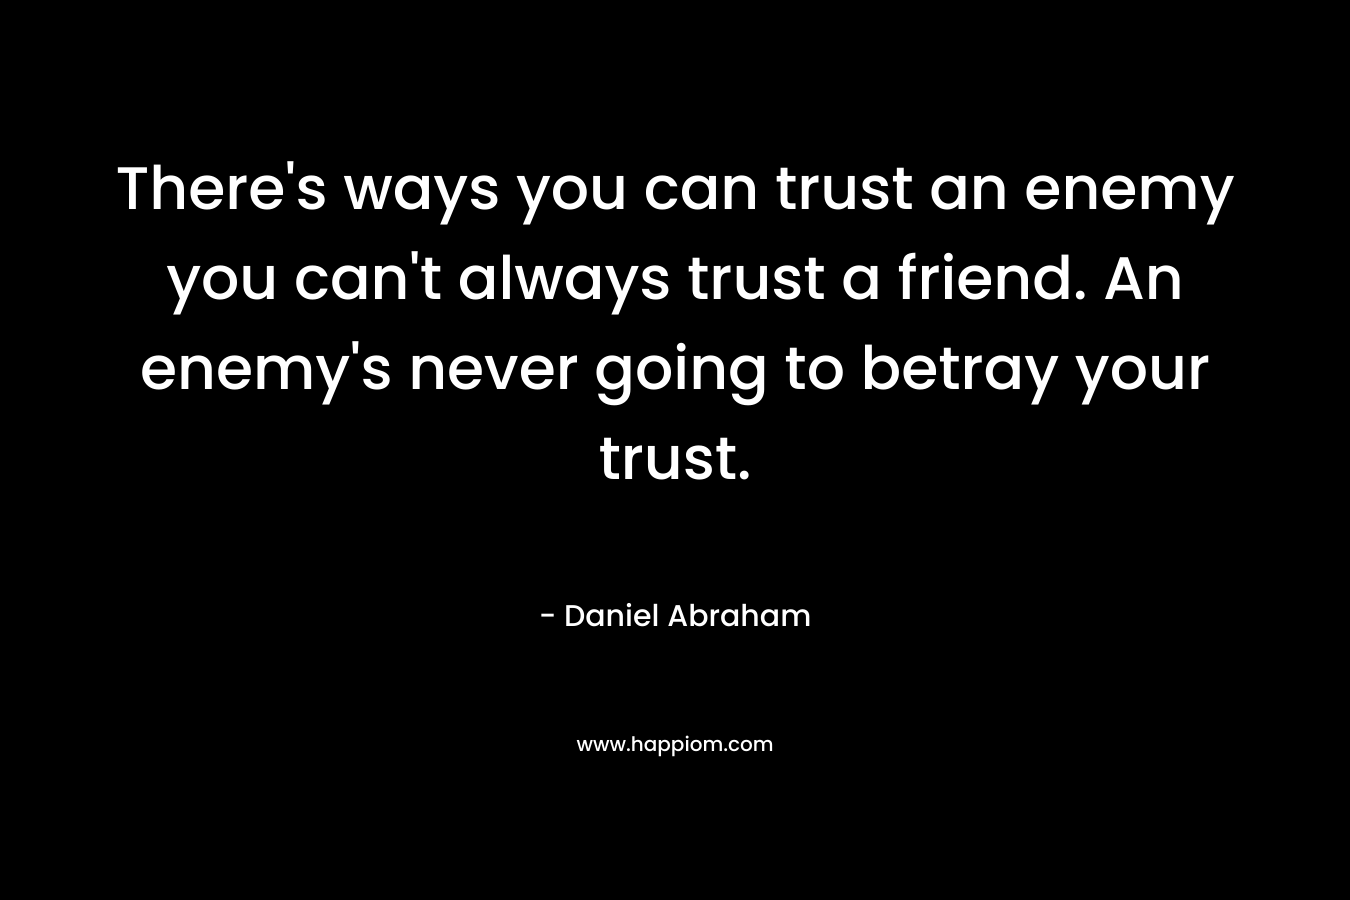 There's ways you can trust an enemy you can't always trust a friend. An enemy's never going to betray your trust.